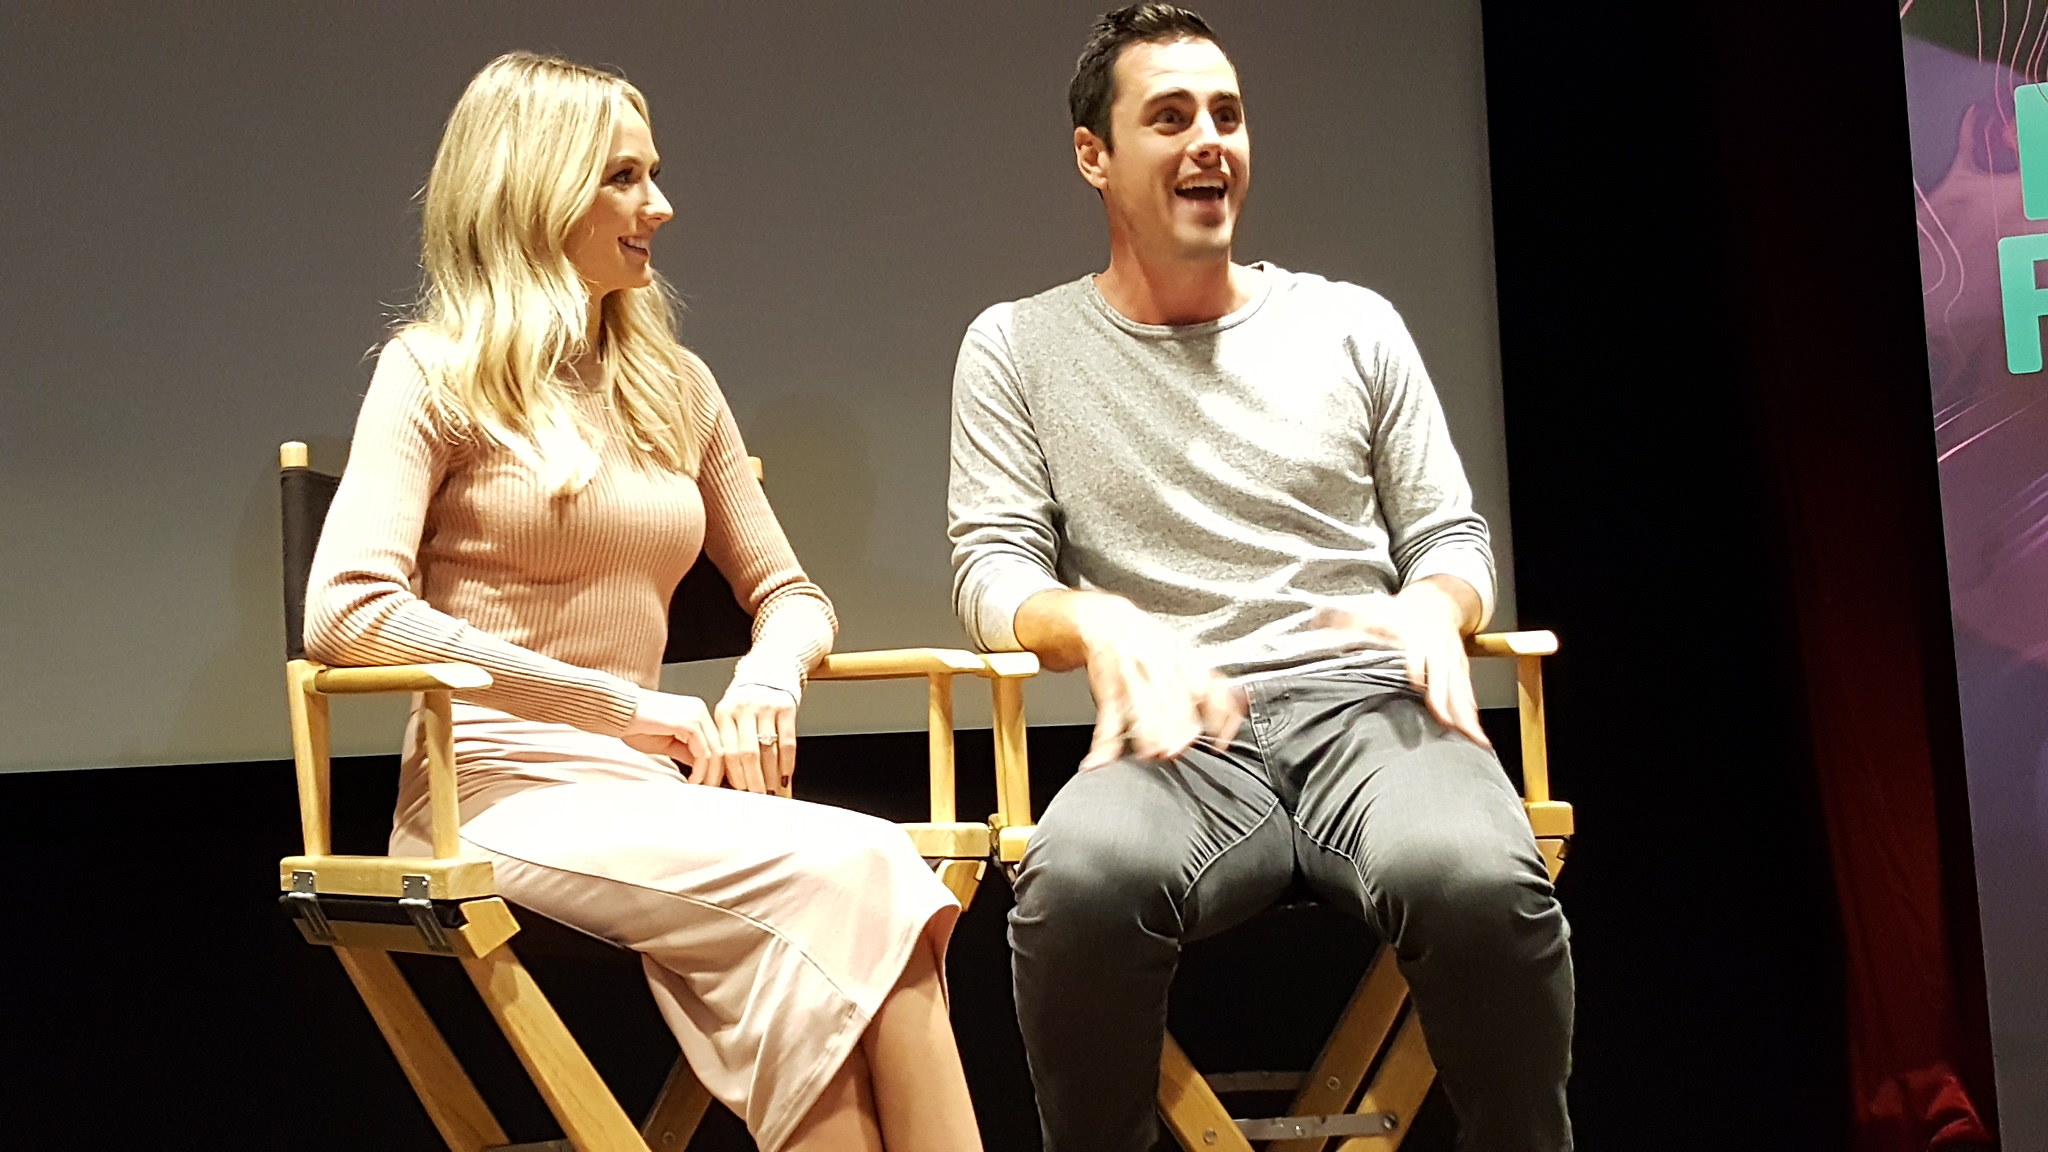 Exclusive Q&A Interview with Ben & Lauren : Happily Ever After?